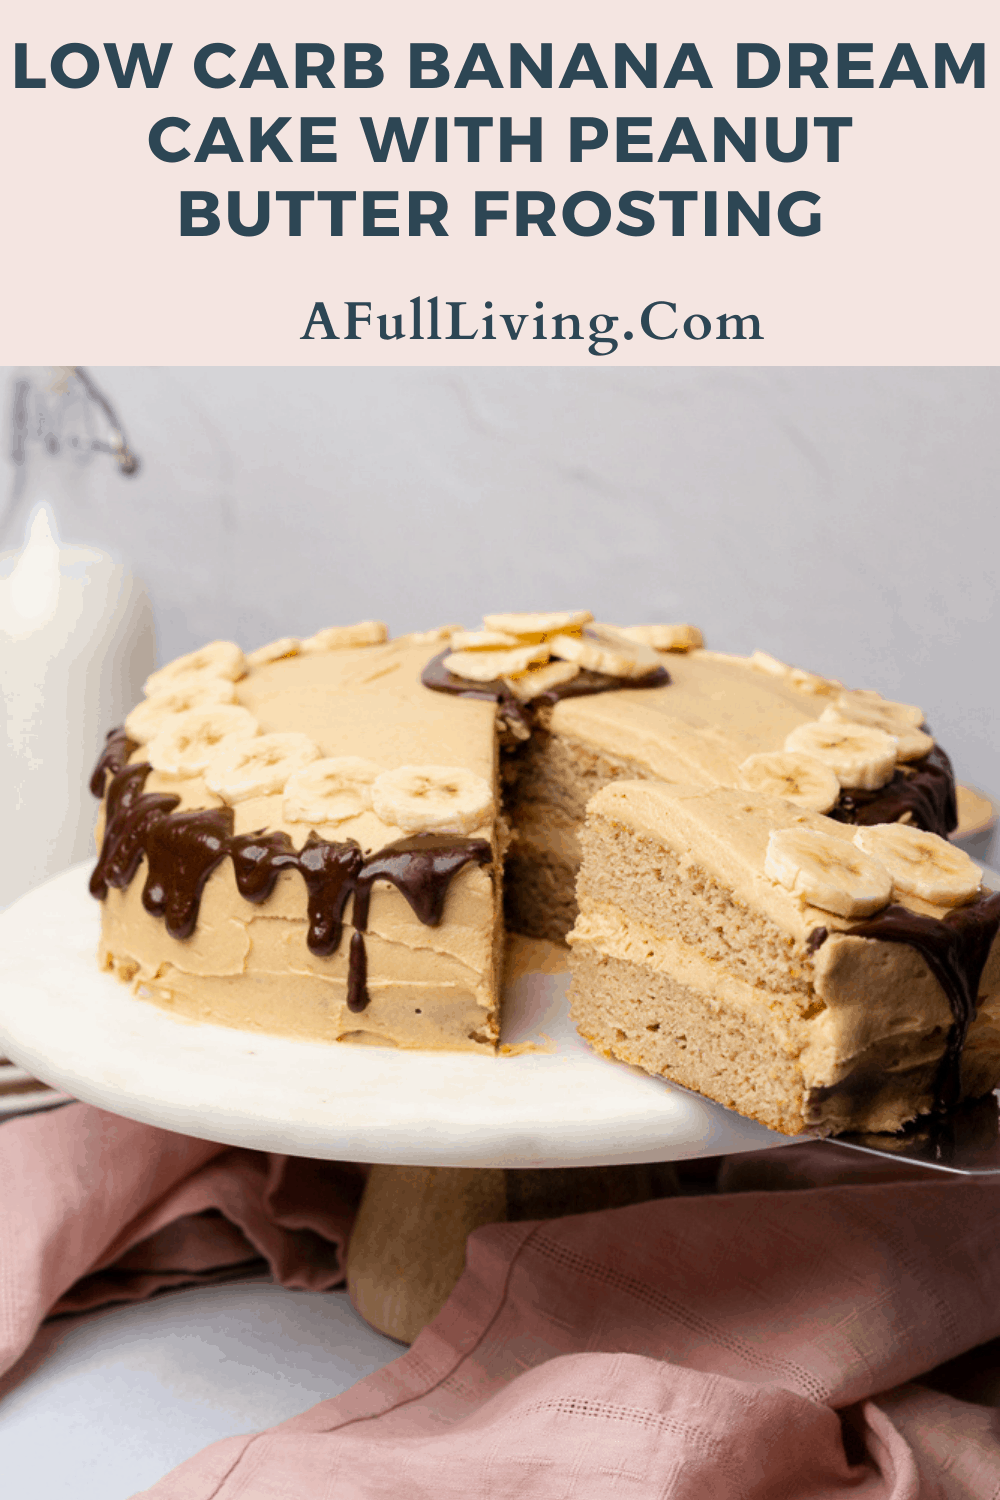 Low Carb Banana Dream Cake with Peanut Butter Frosting graphic with text